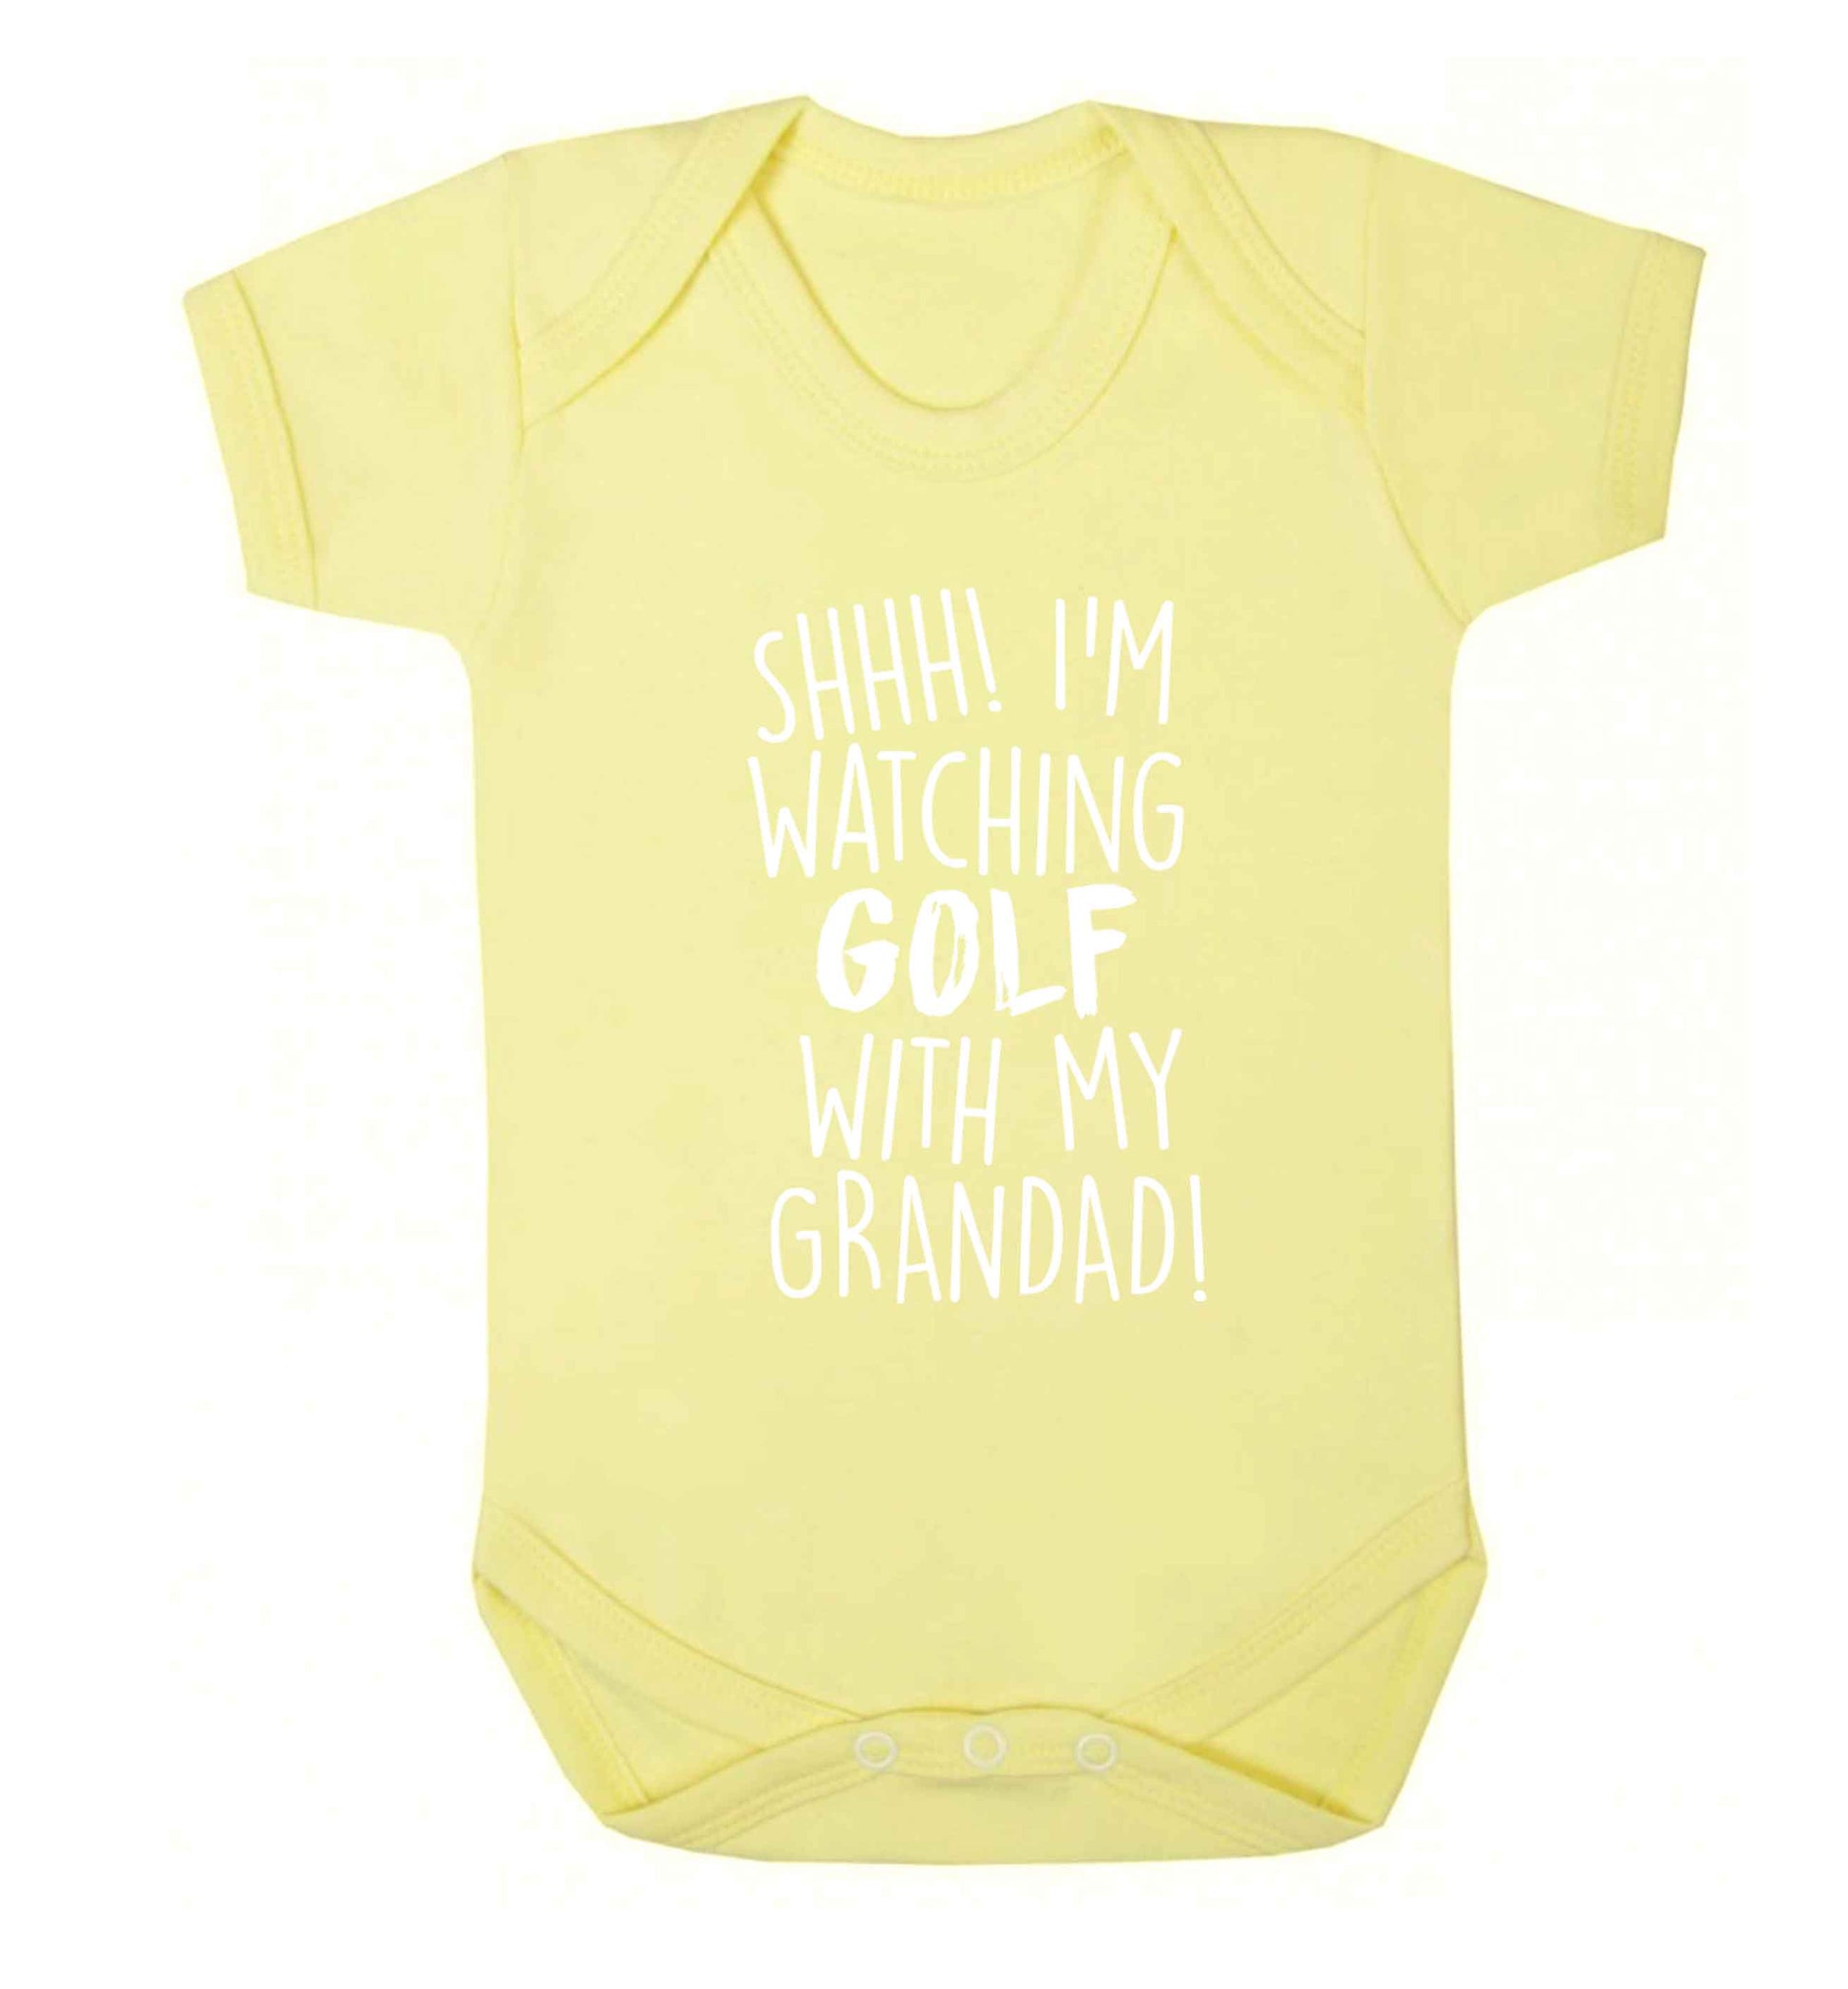 Shh I'm watching golf with my grandad Baby Vest pale yellow 18-24 months